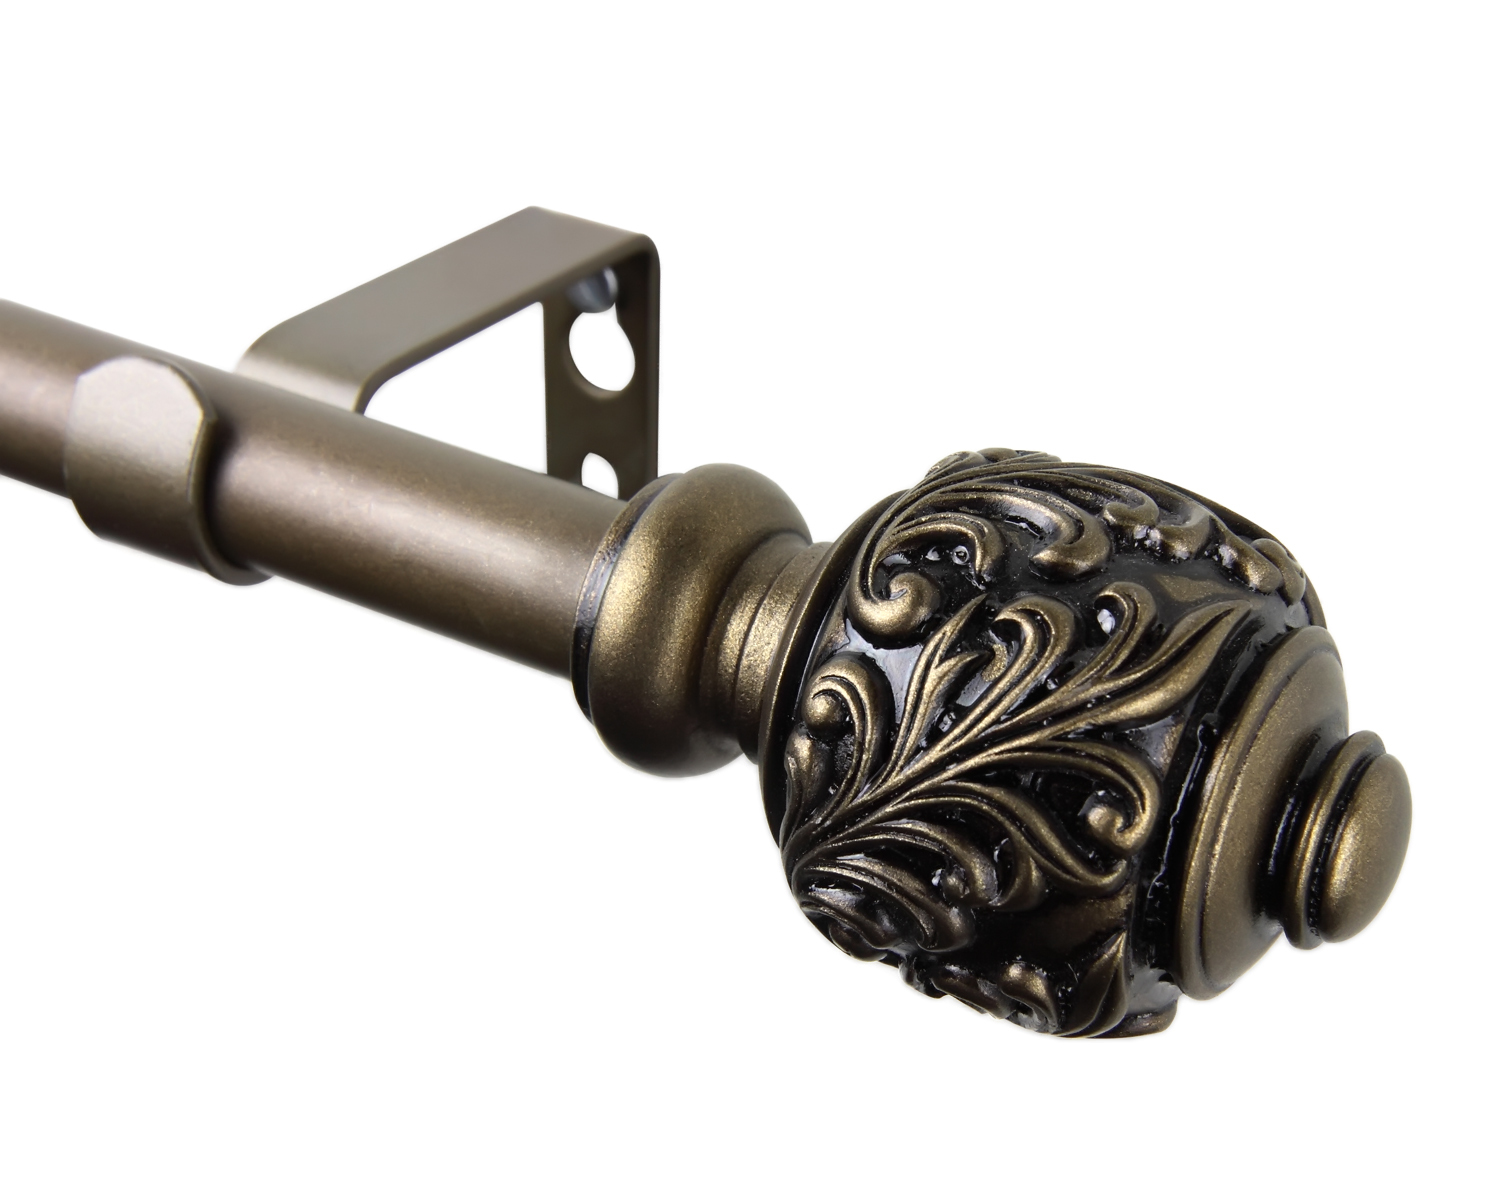 Primary image for Rod Desyne Home Window Decorative Tilly Curtain Rod 28-48 inch - Antique Gold